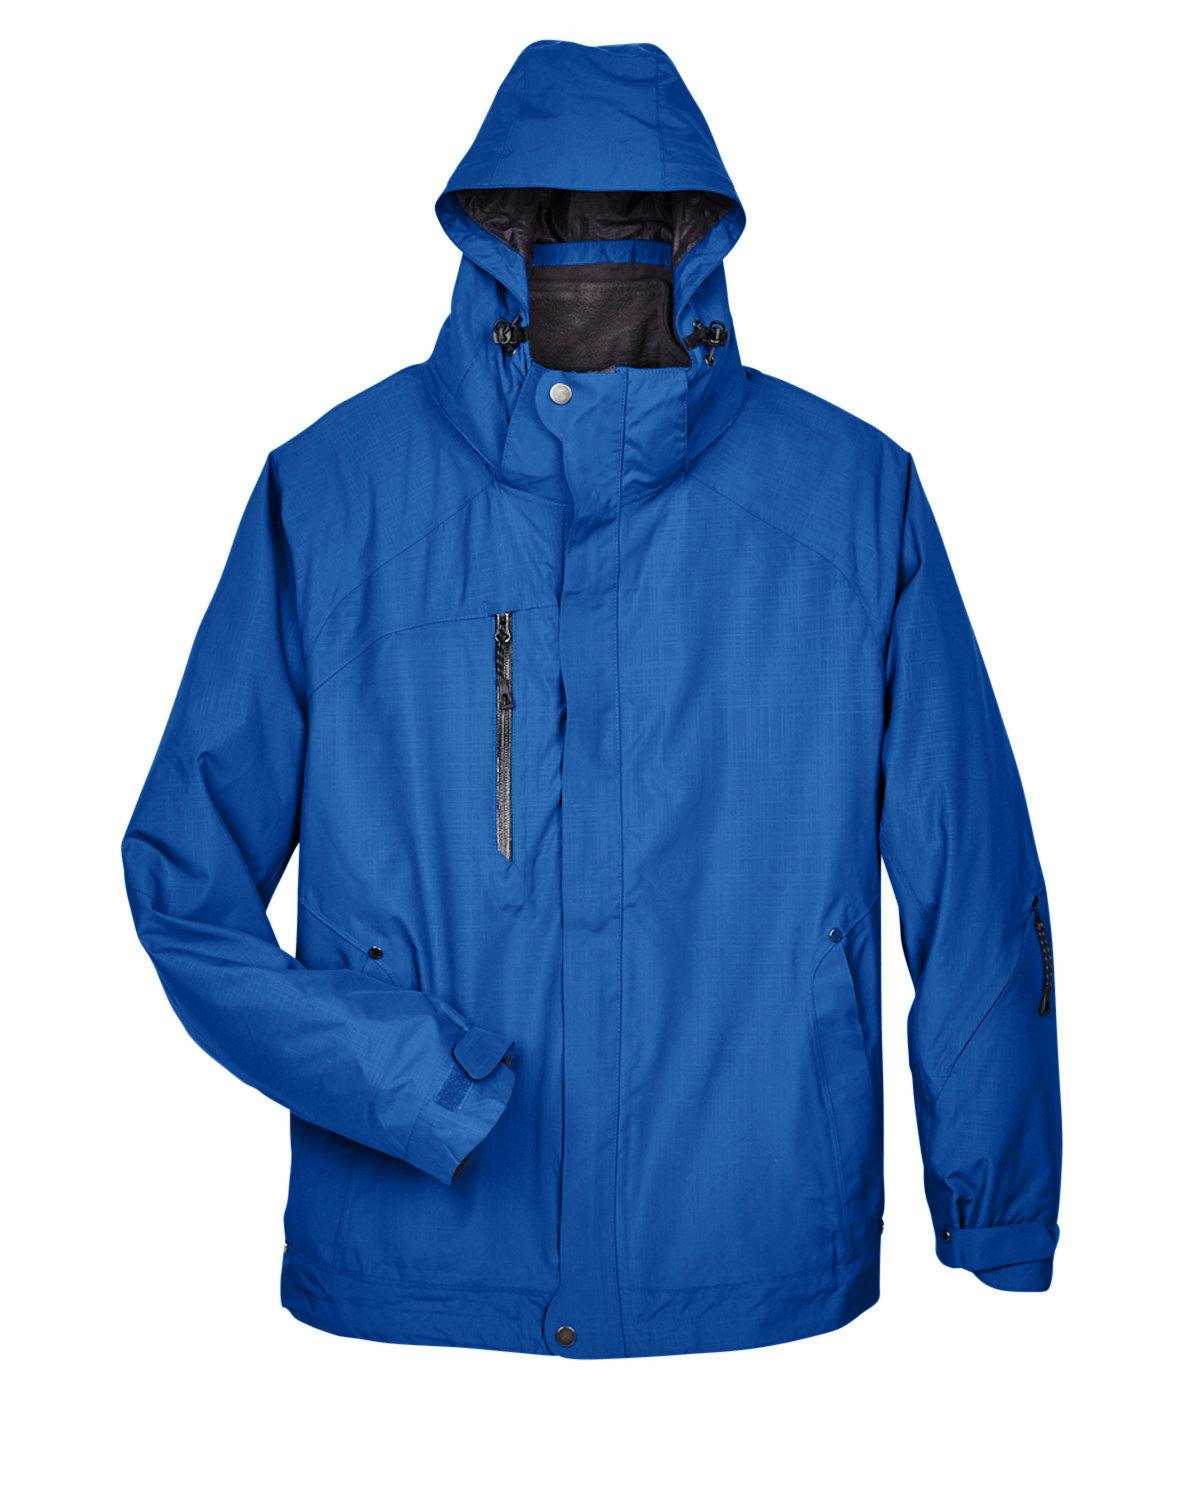 Image for Men's Caprice 3-in-1 Jacket with Soft Shell Liner